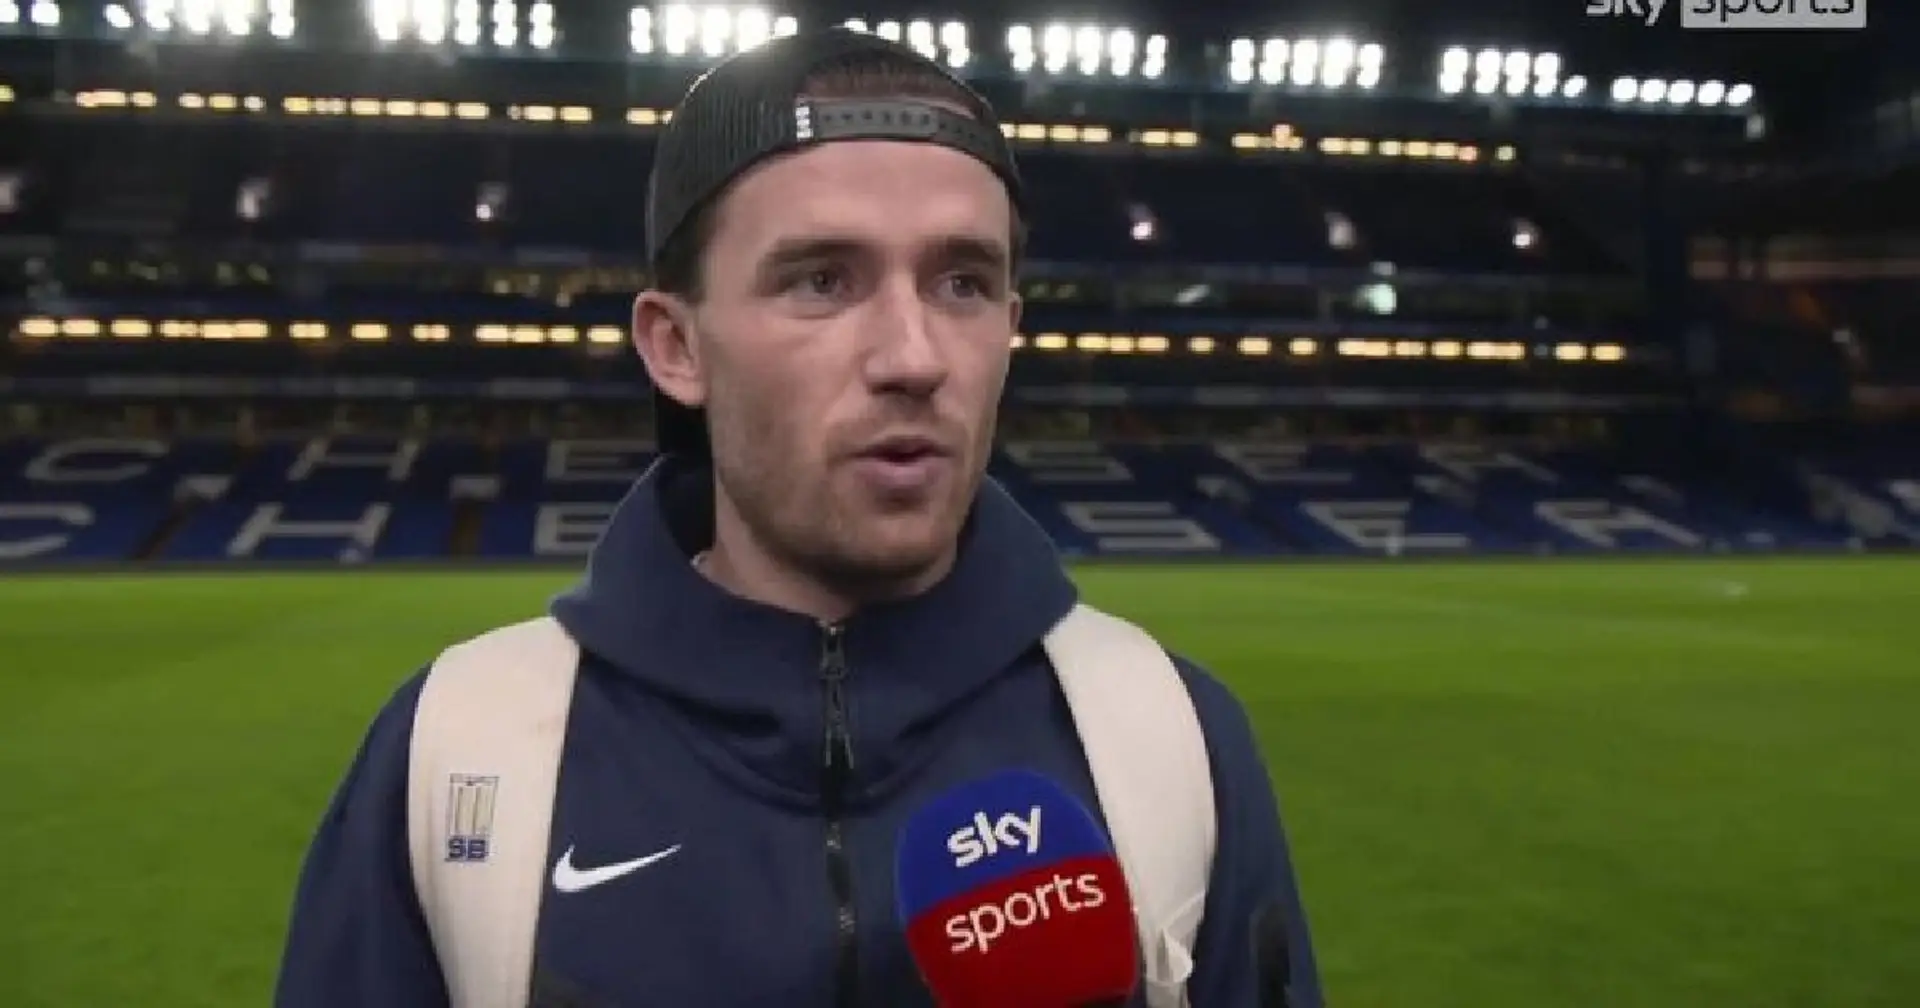 'Biggest game of the season on Tuesday': Chilwell looks forward to Champions League clash